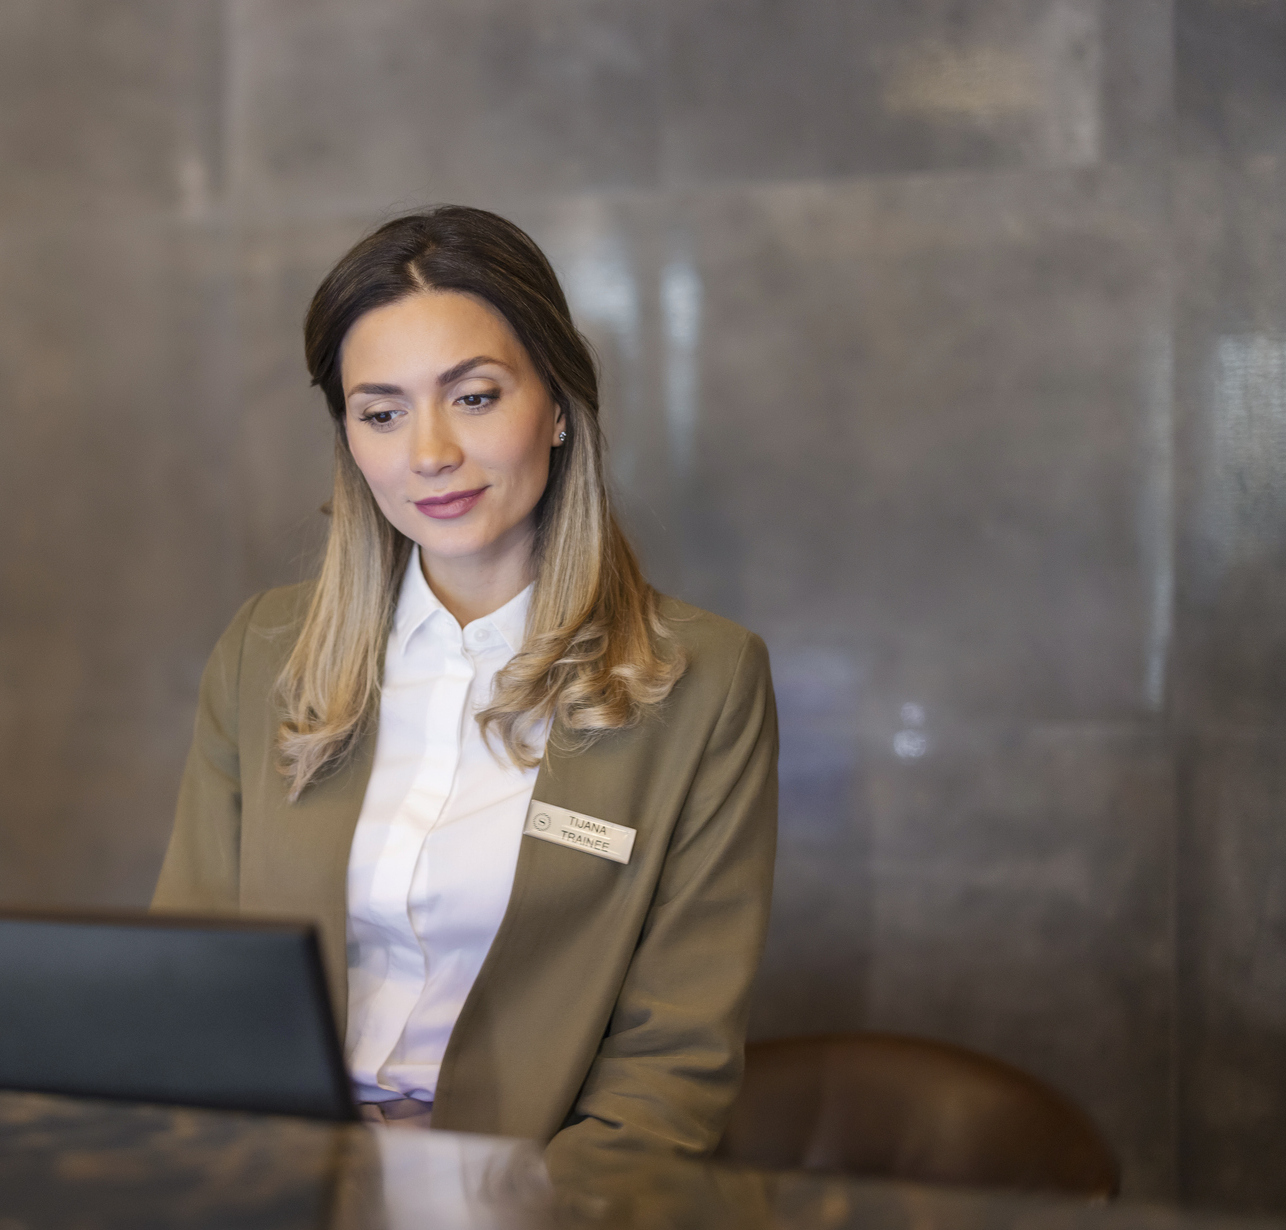 Female trainee working at a hotel's reception desk